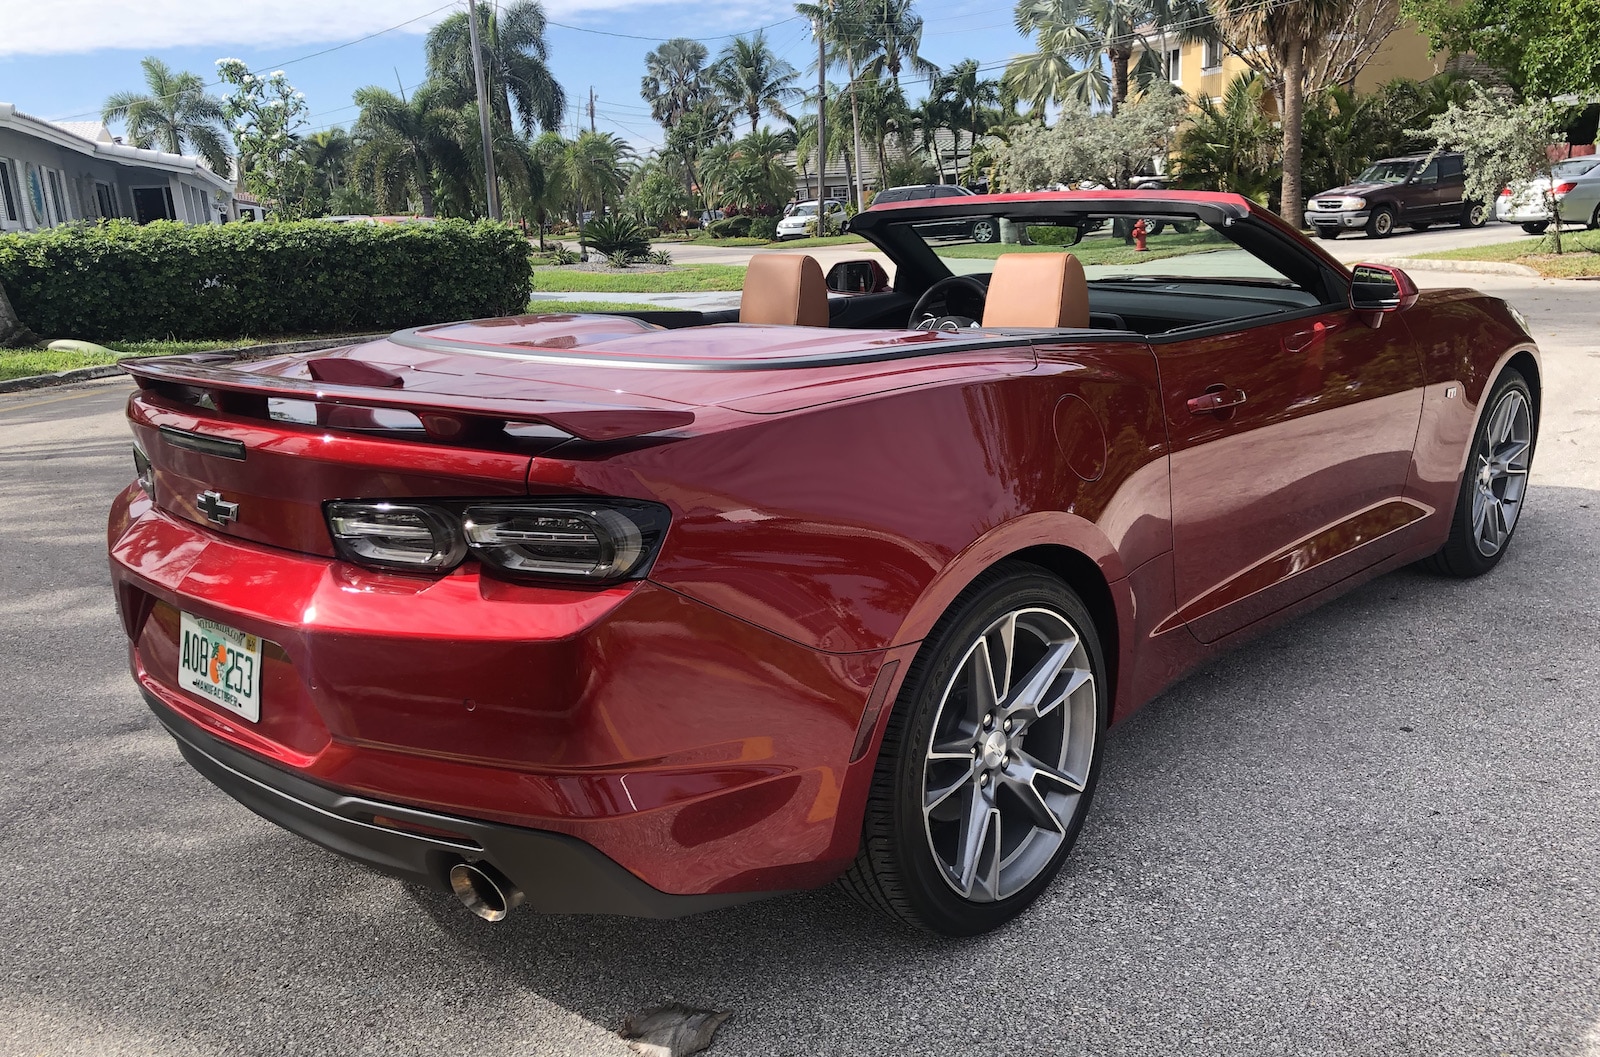 A Week With 2021 Chevrolet Camaro Rs Convertible The Detroit Bureau